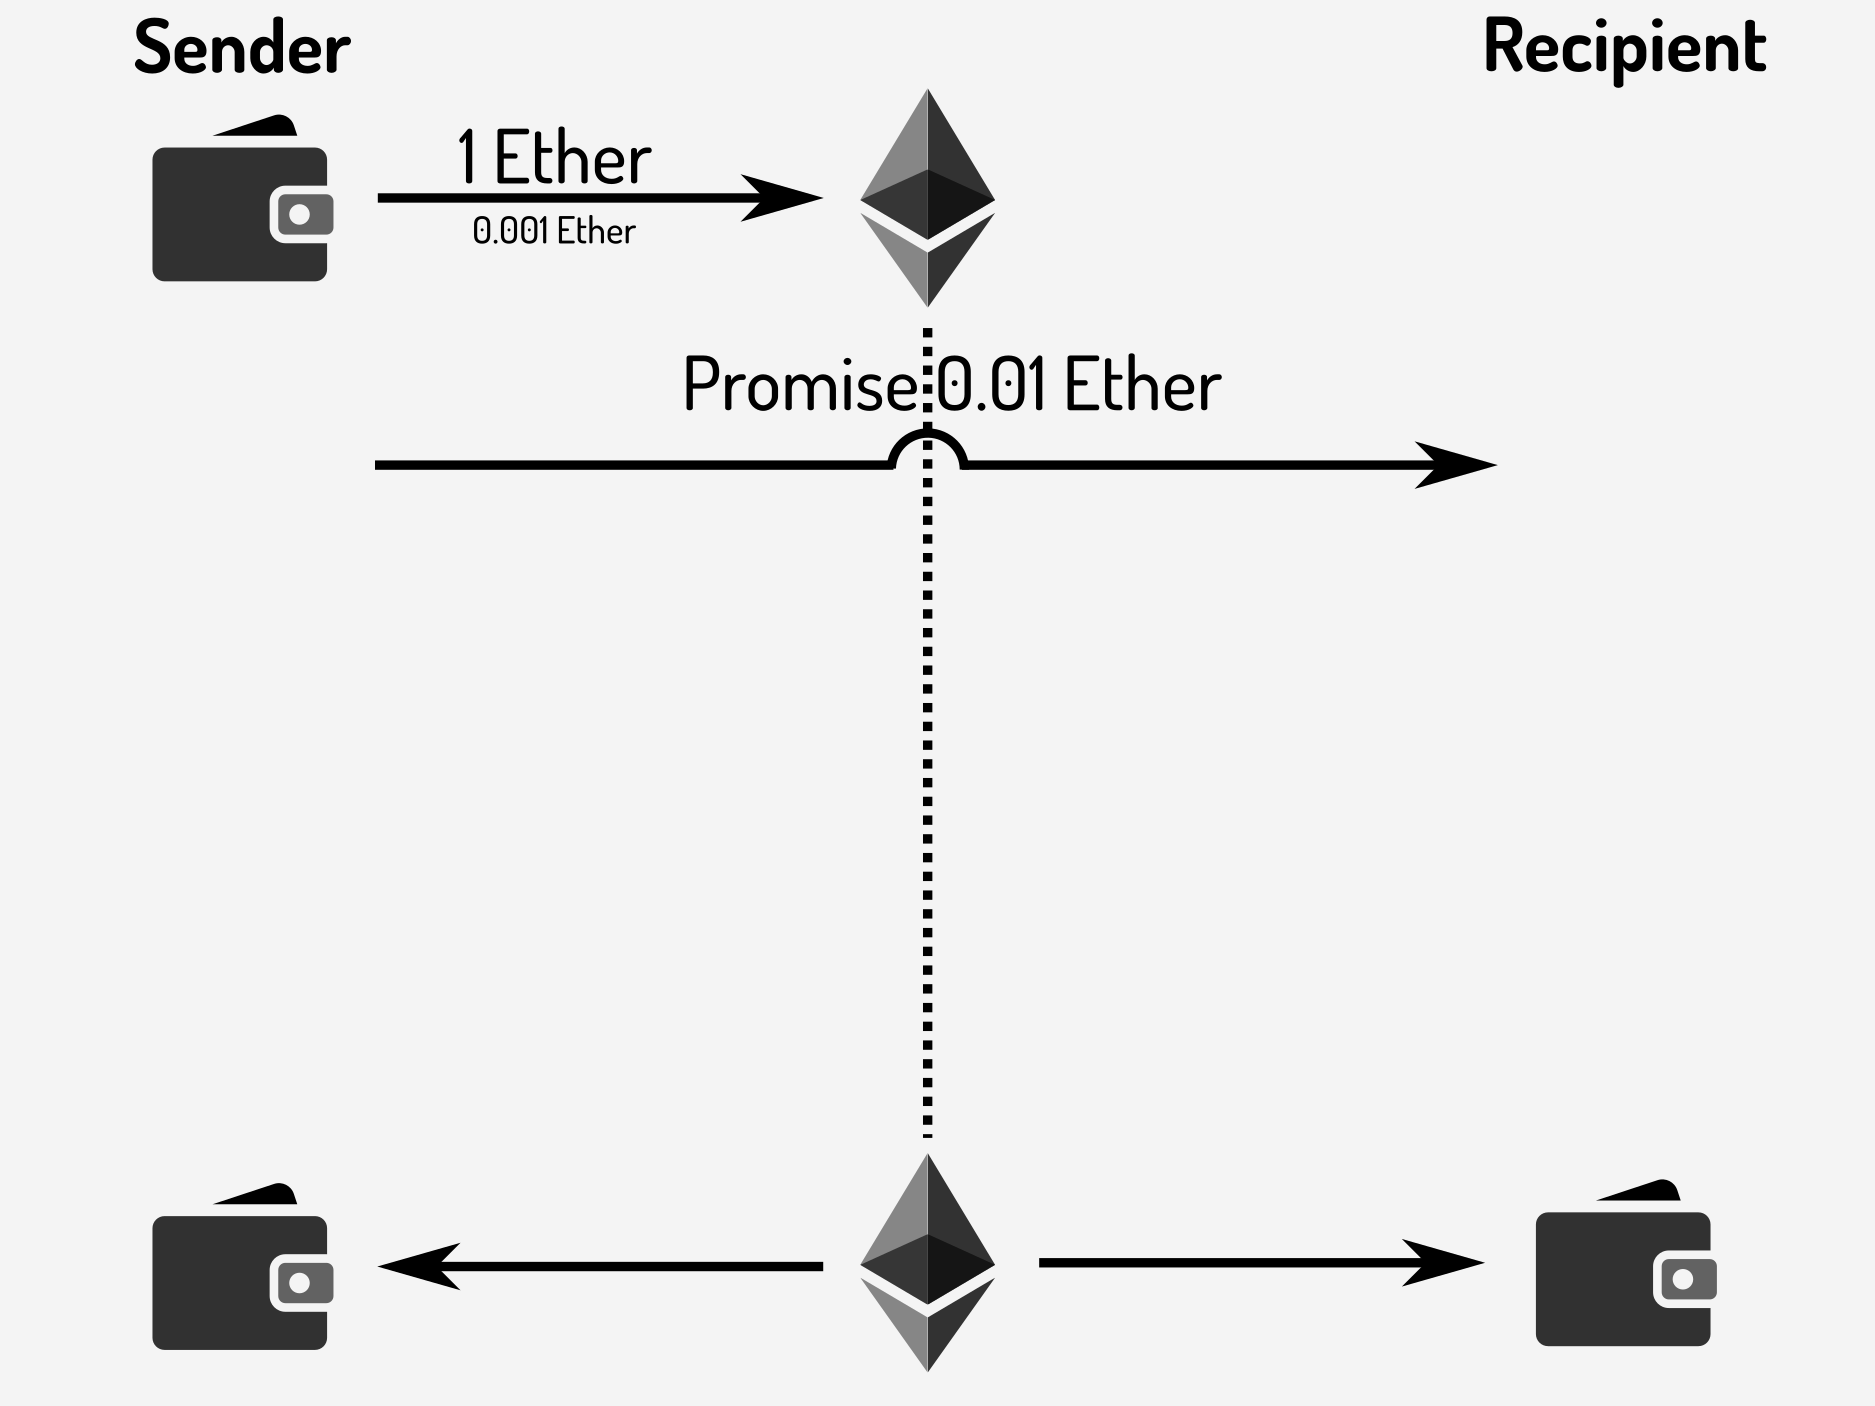 Sender transmits off-chain promise to recipient